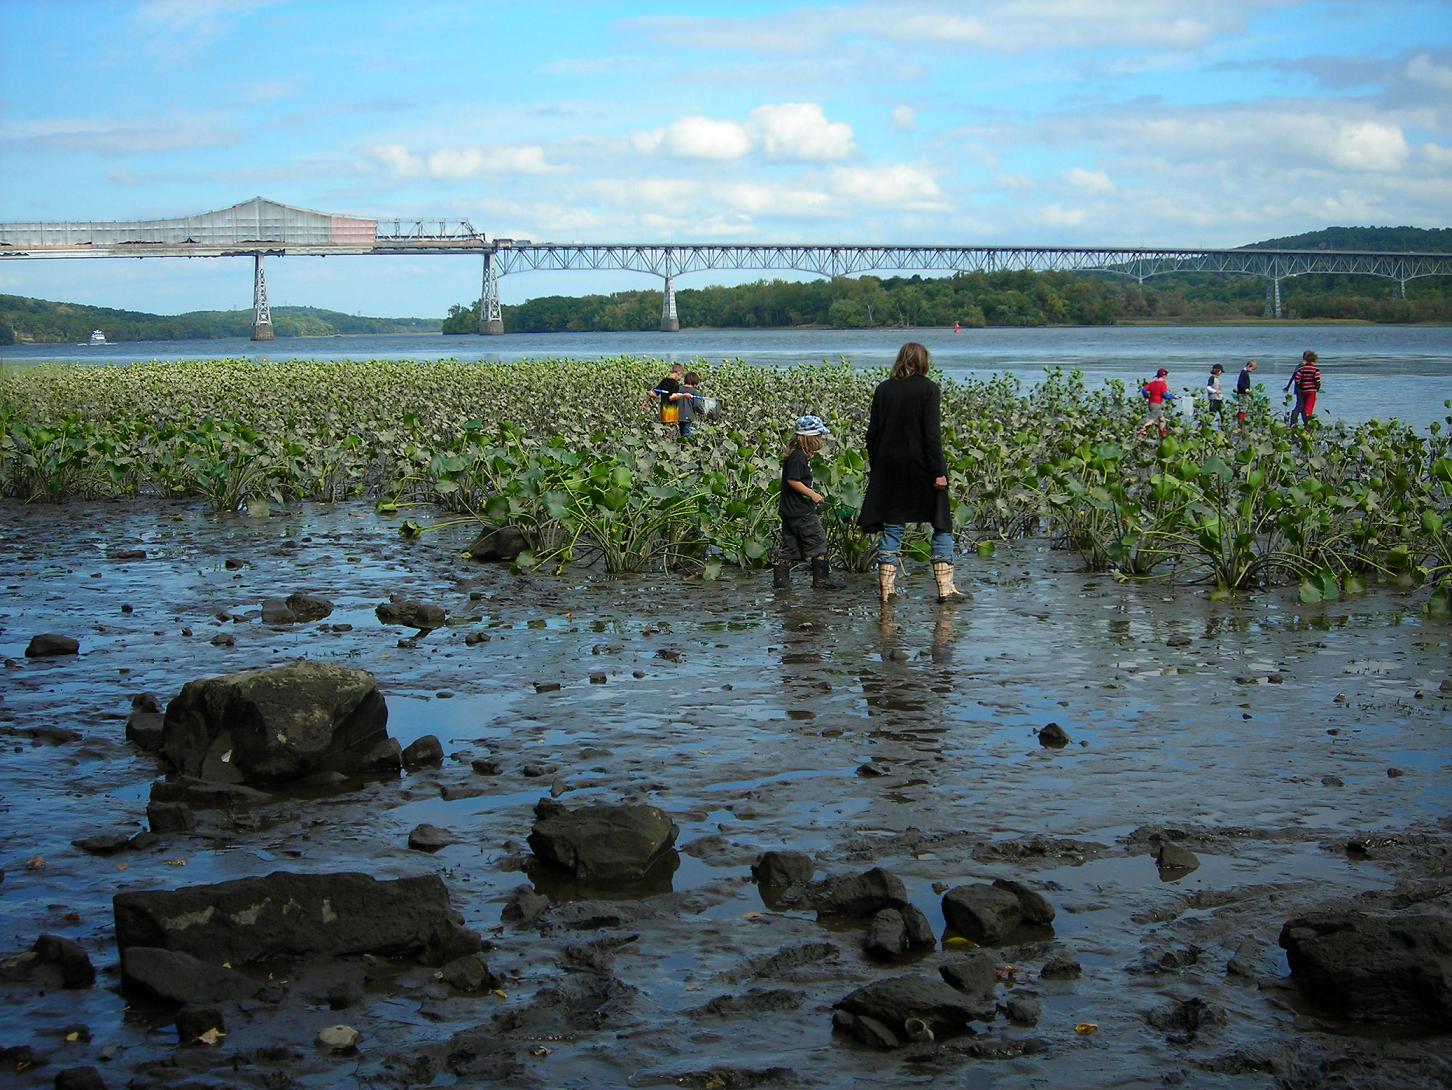 A teacher and young students explore a tidal marsh at Dutchmans Landing on the Hudson River. Photo by L Heady